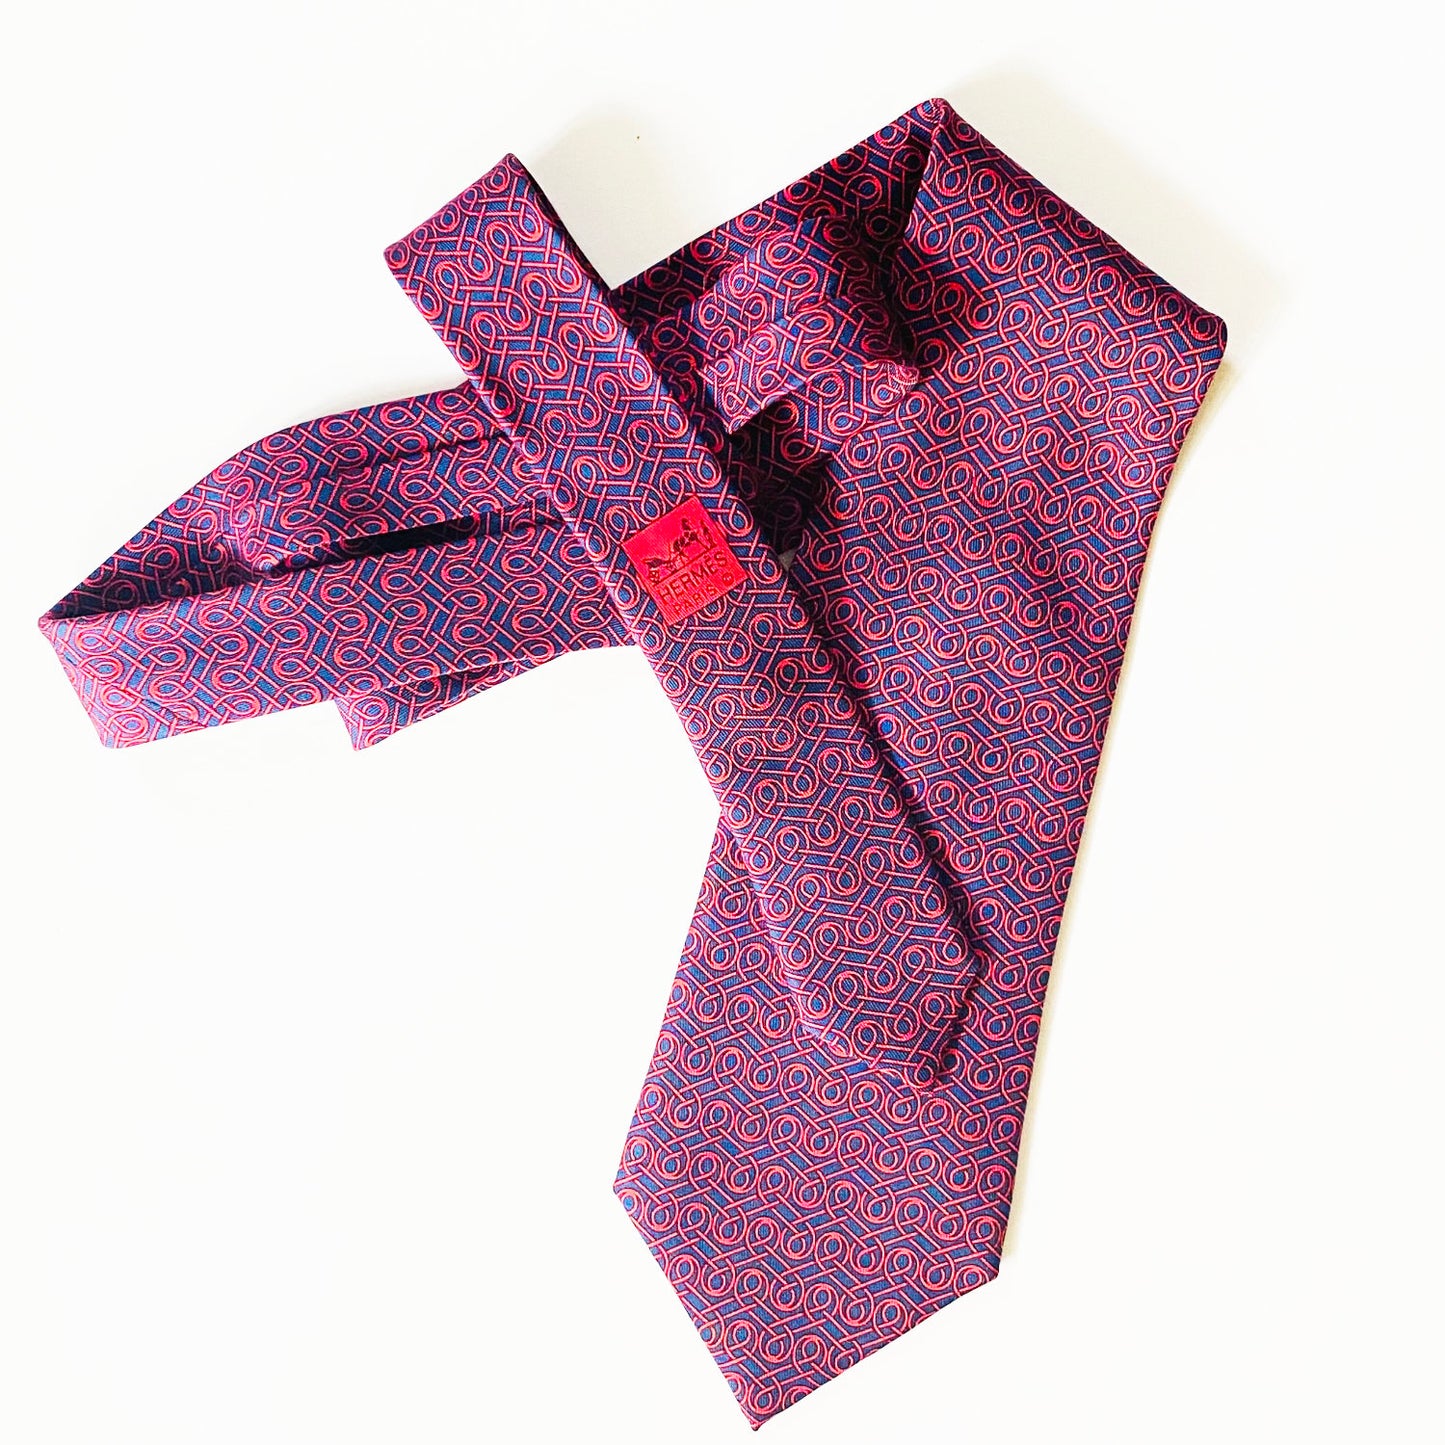 te pluste_Iconic Objects_Hermes tie vintage great condition made in France